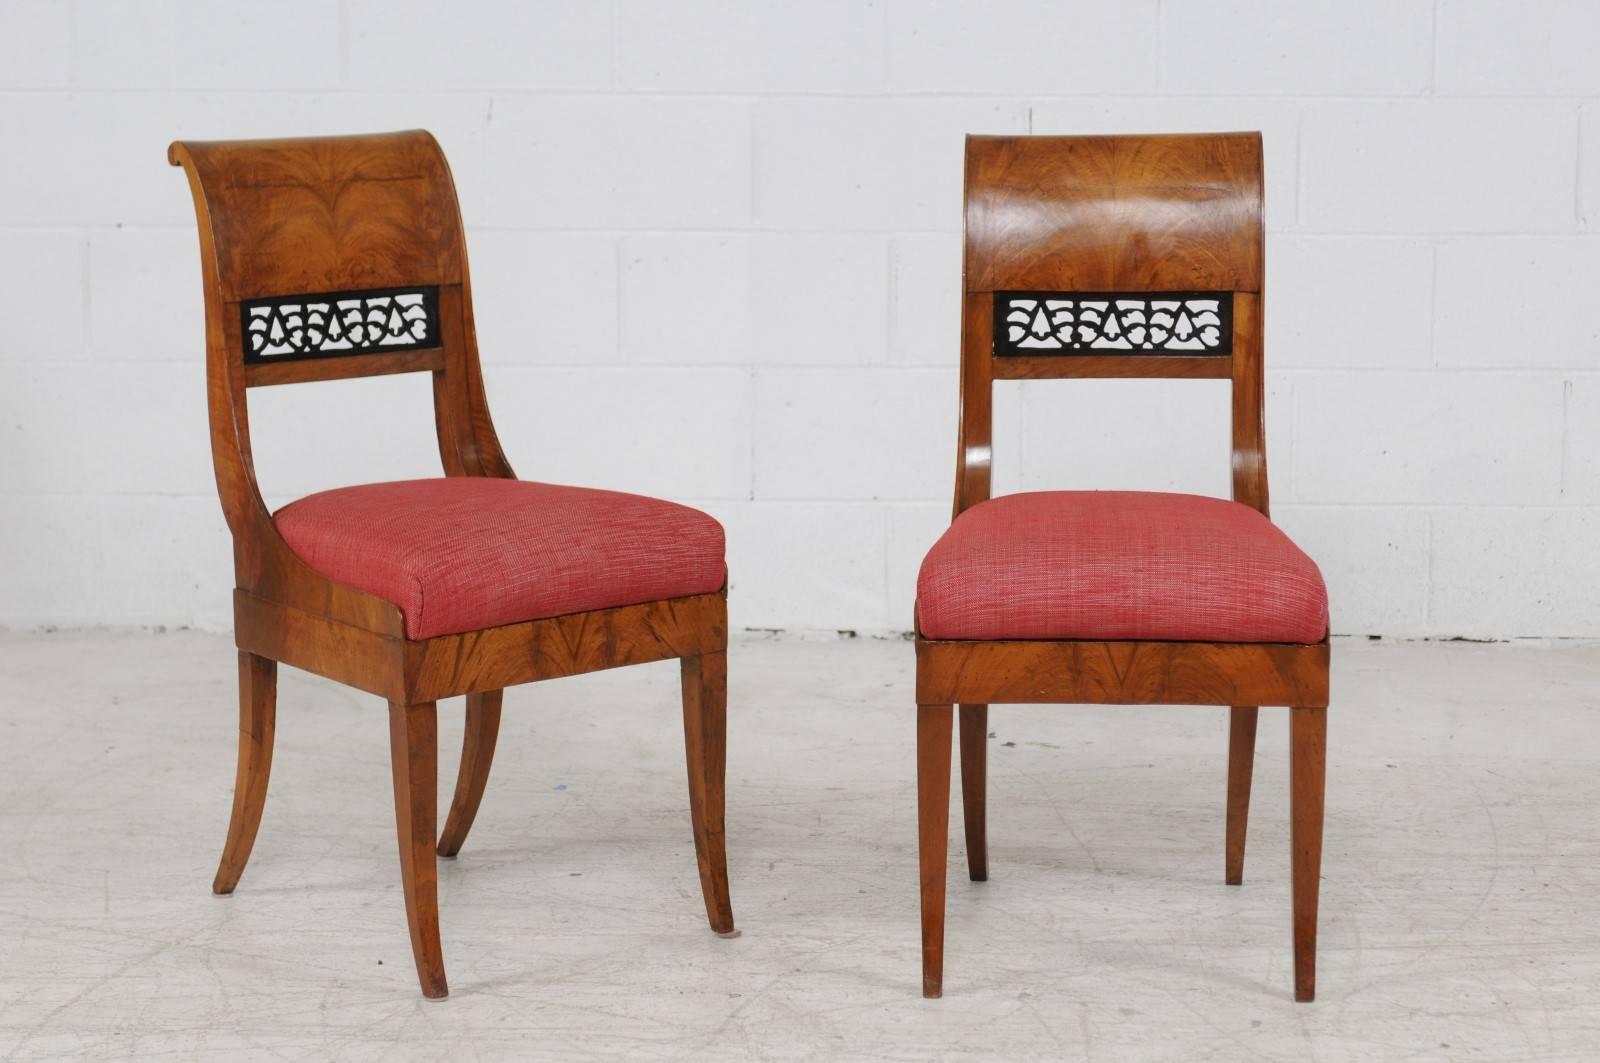 A set of four Austrian Biedermeier period side chairs from the first half of the 19th century with red upholstery. Each of this set of Biedermeier chairs features an exquisite bookmarked veneered body with a delicately out-scrolled back, adorned